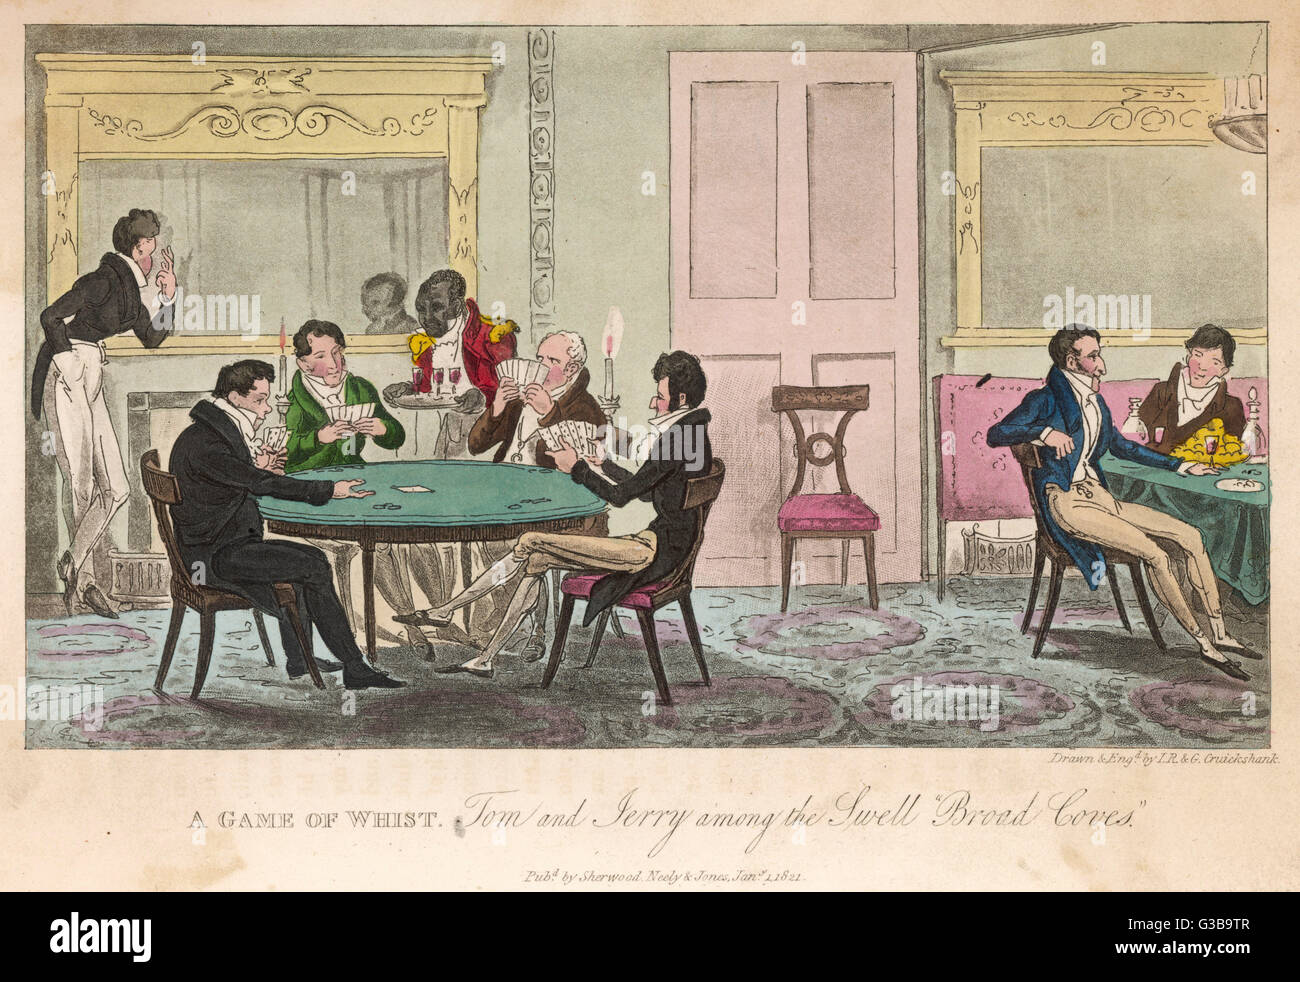 A Game of Whist: Tom and Jerry  among the Swell 'Broad Coves'  - indulging in a hand or two  of cards at a plush  gentleman's club      Date: 1821 Stock Photo